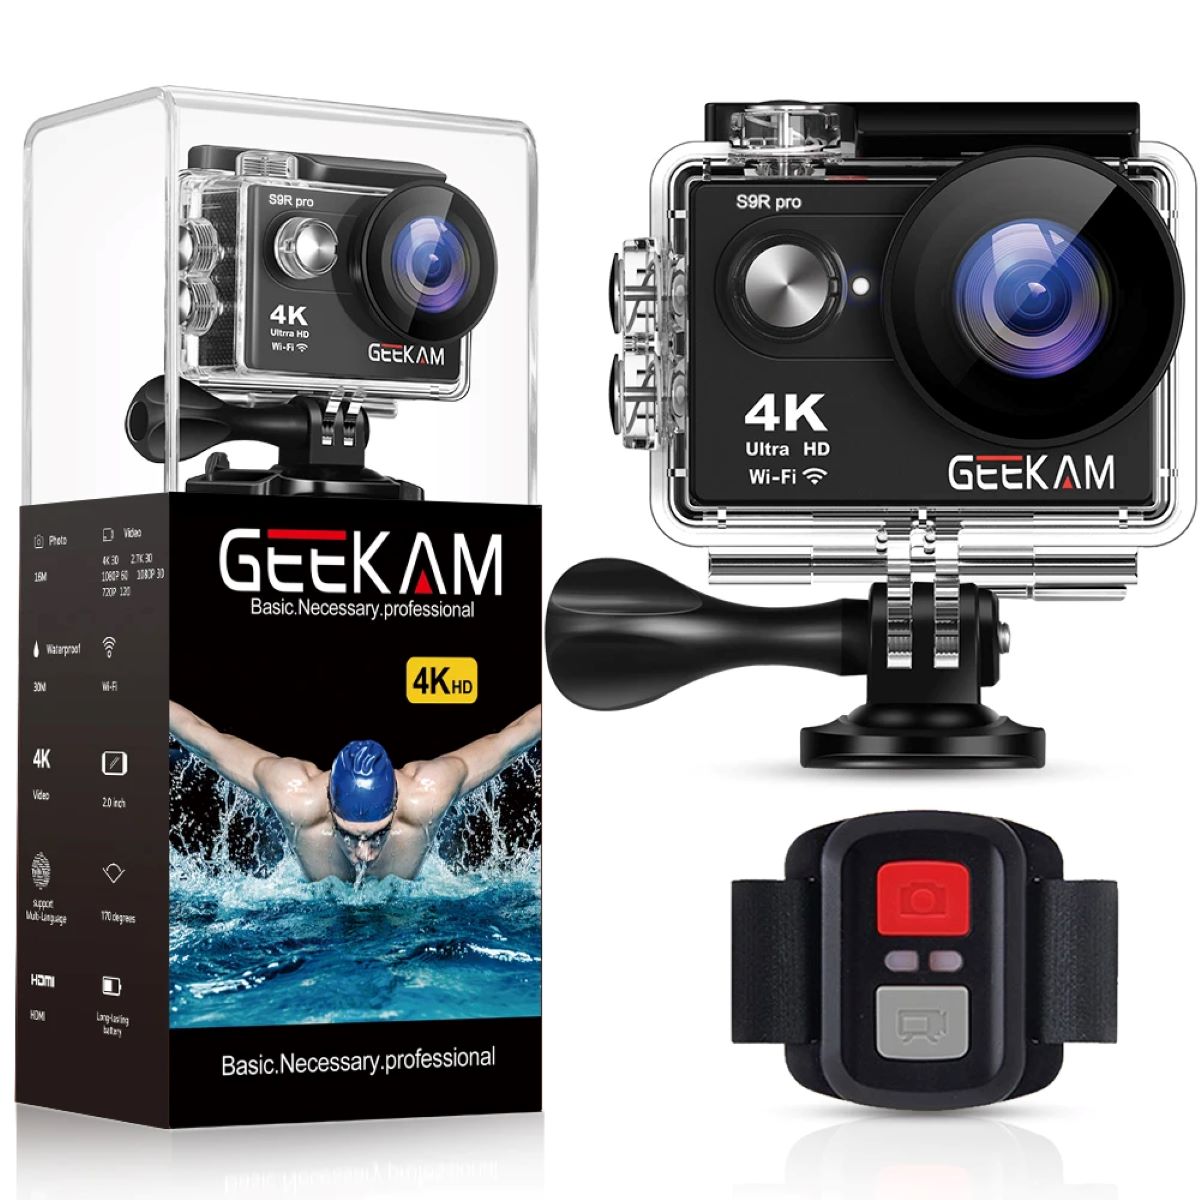 geekam-4k-30fps-action-camera-how-to-use